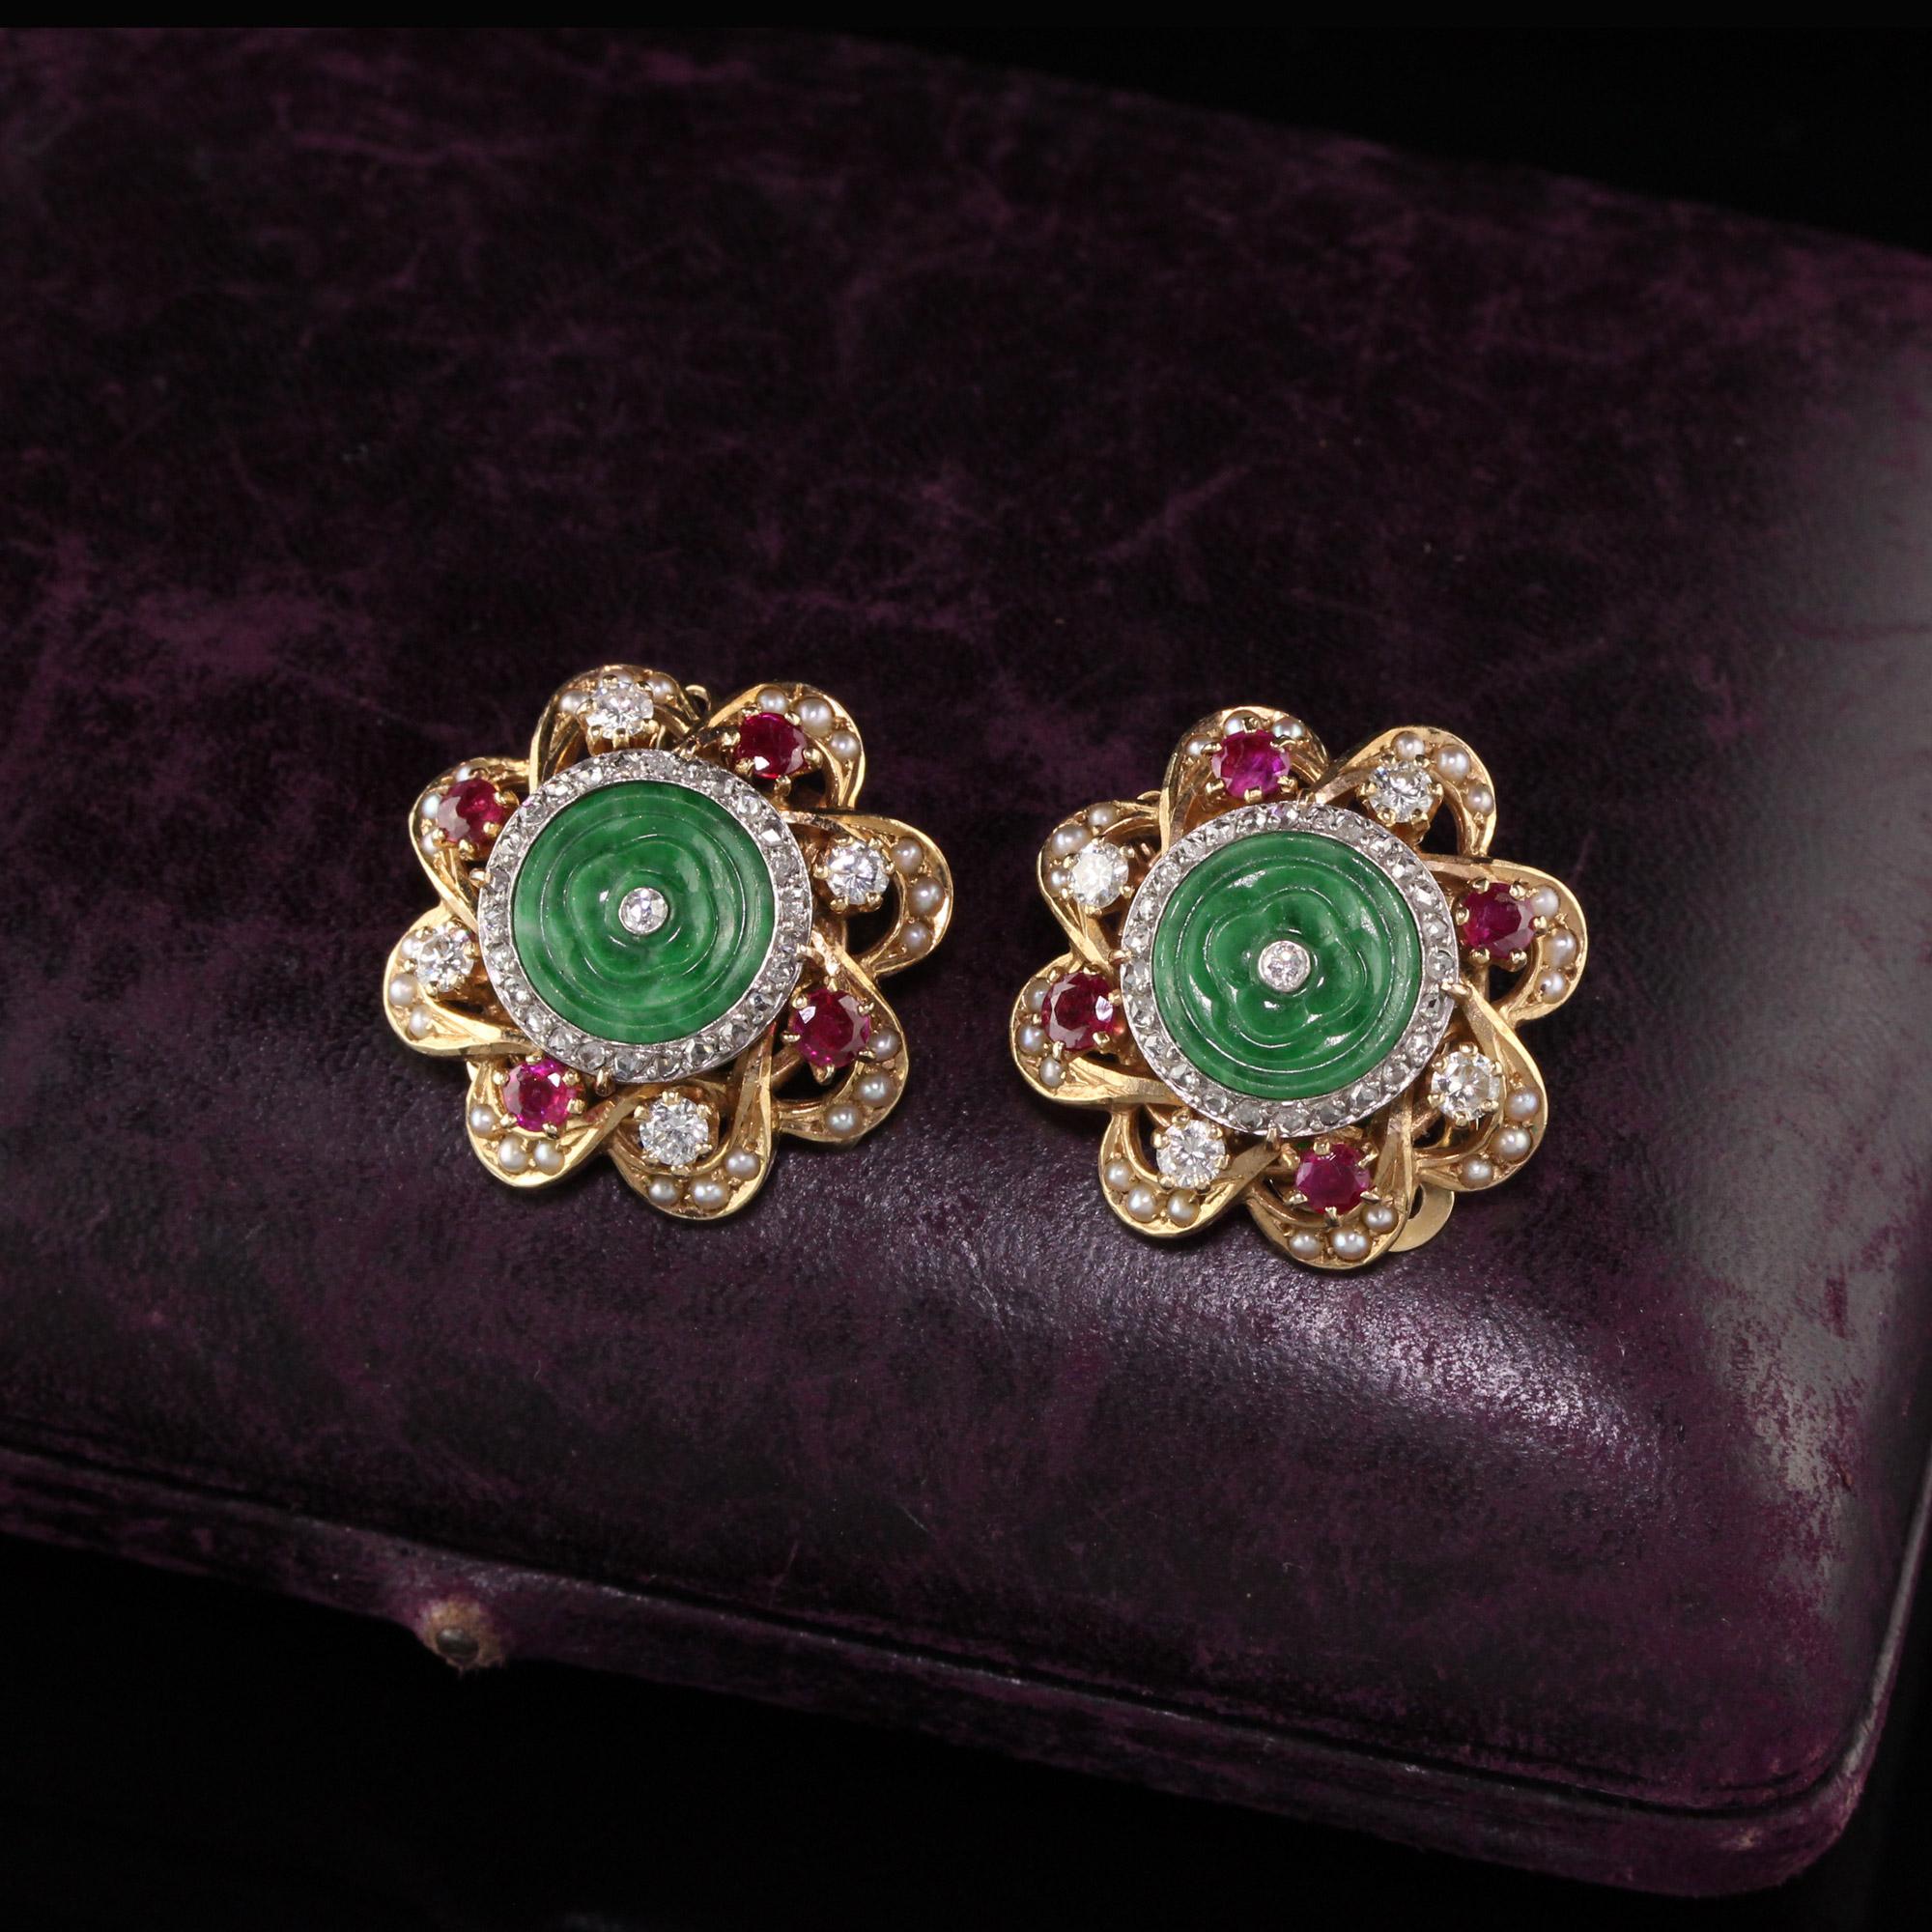 Beautifully designed retro earrings with diamonds, rubies, seed pearls and jades.

#E0013

Metal: 14K Yellow Gold

Weight: 16 Grams

Total Diamond Weight: Approximately 0.75 CTS

Total Ruby Weight: Approximately 0.75 CTS

Measurements: 23.8 mm